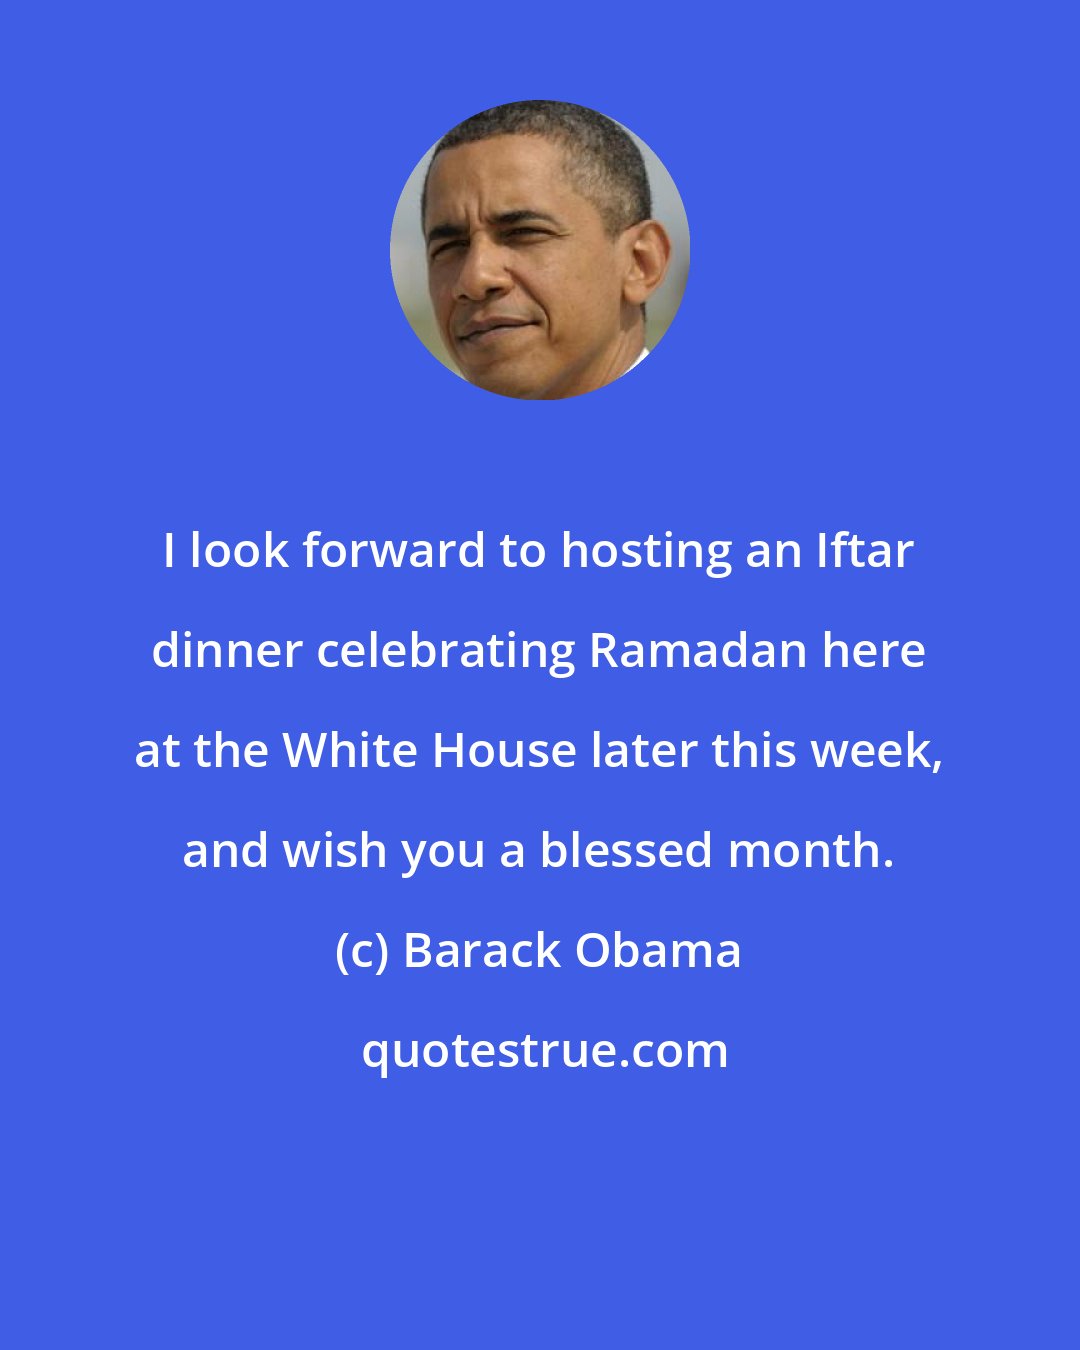 Barack Obama: I look forward to hosting an Iftar dinner celebrating Ramadan here at the White House later this week, and wish you a blessed month.